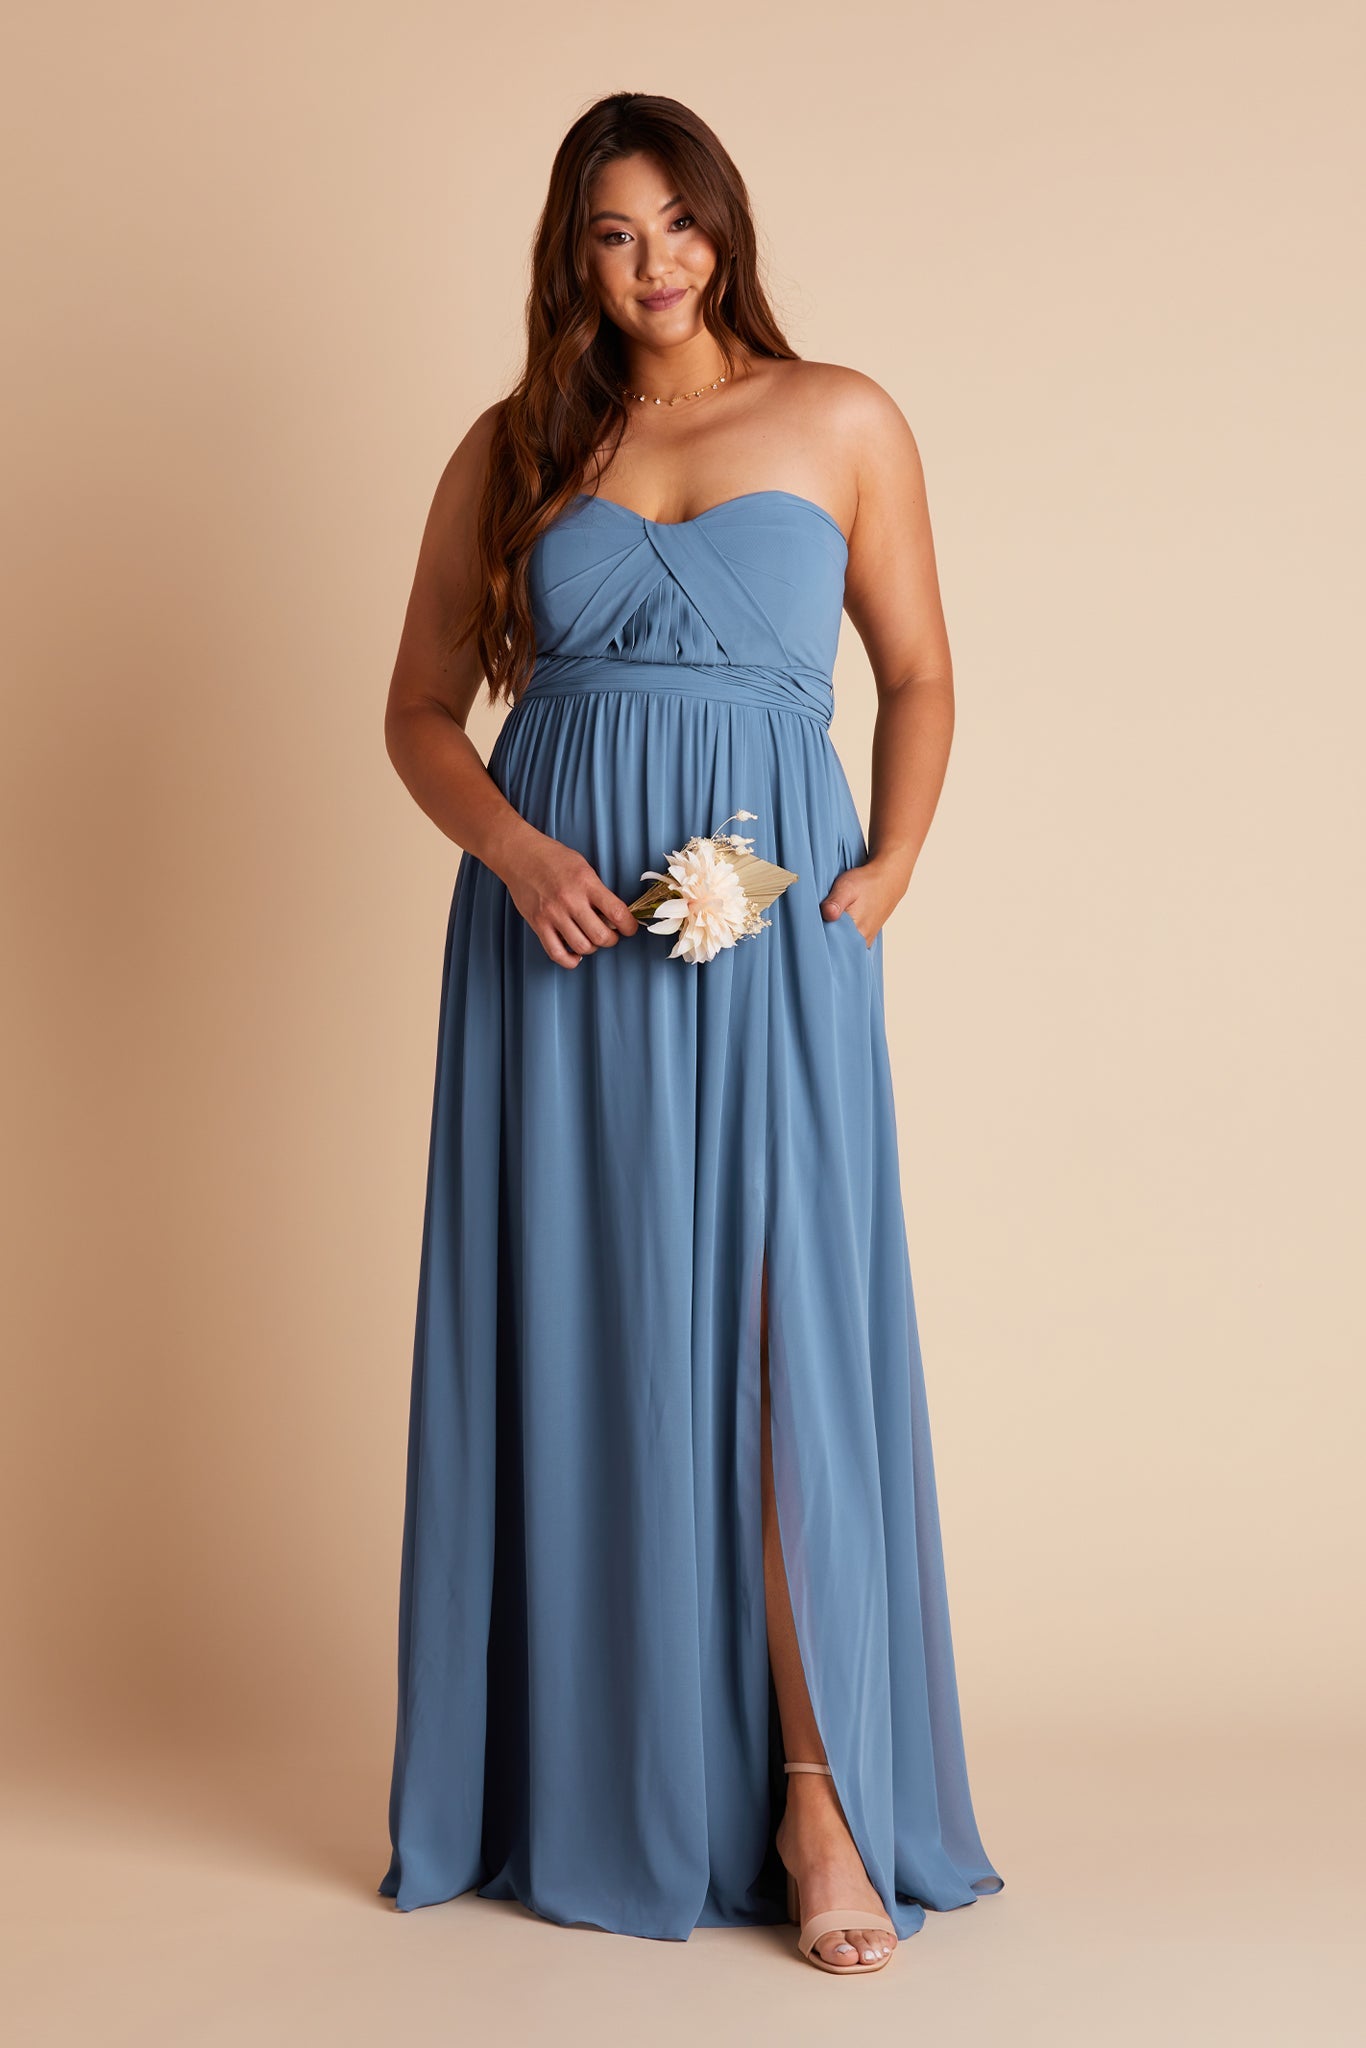 Grace convertible plus size bridesmaid dress with slit in twilight blue chiffon by Birdy Grey, front view with hand in pocket